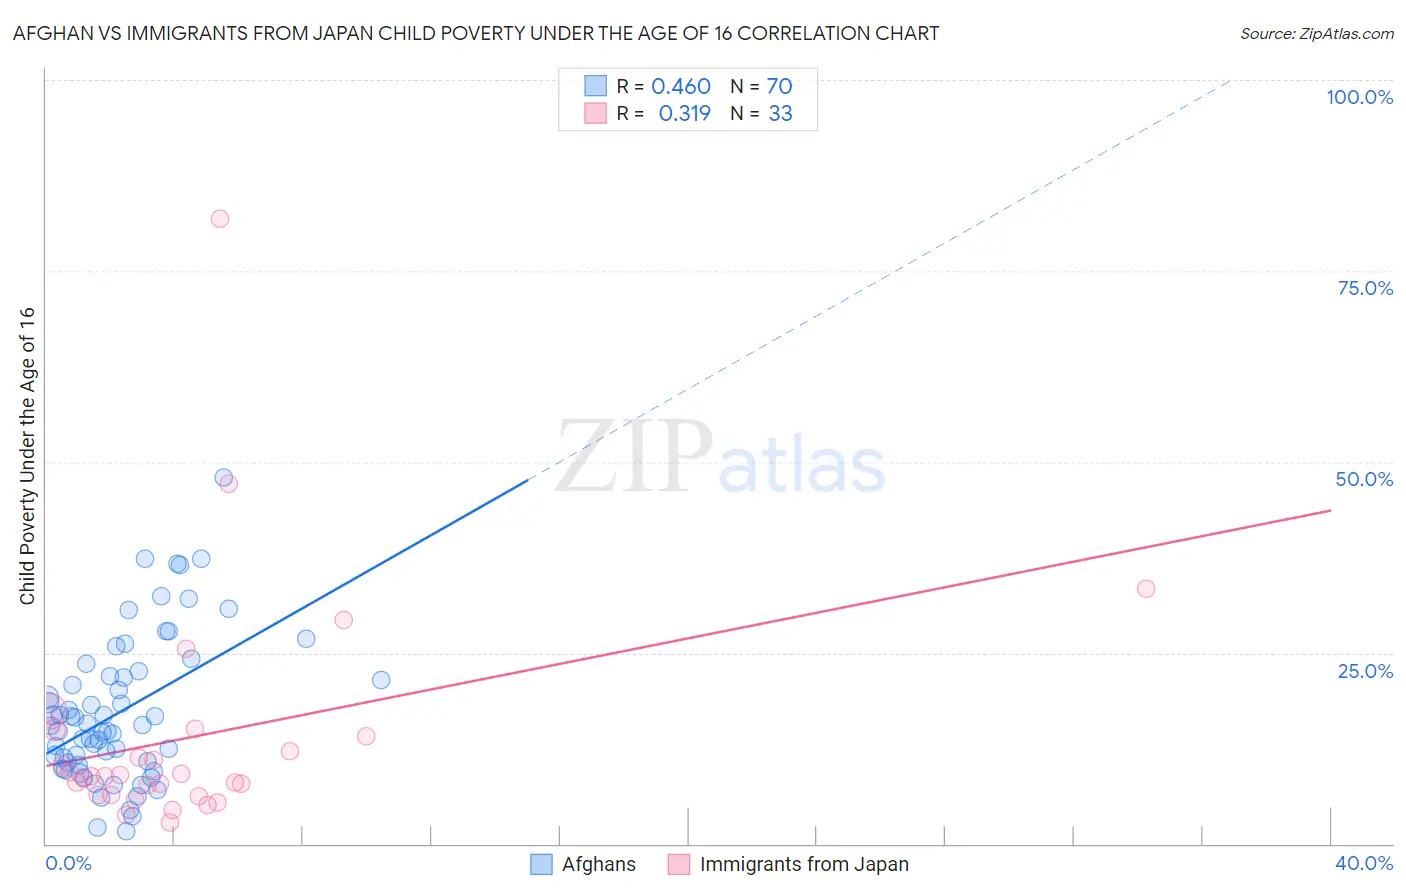 Afghan vs Immigrants from Japan Child Poverty Under the Age of 16